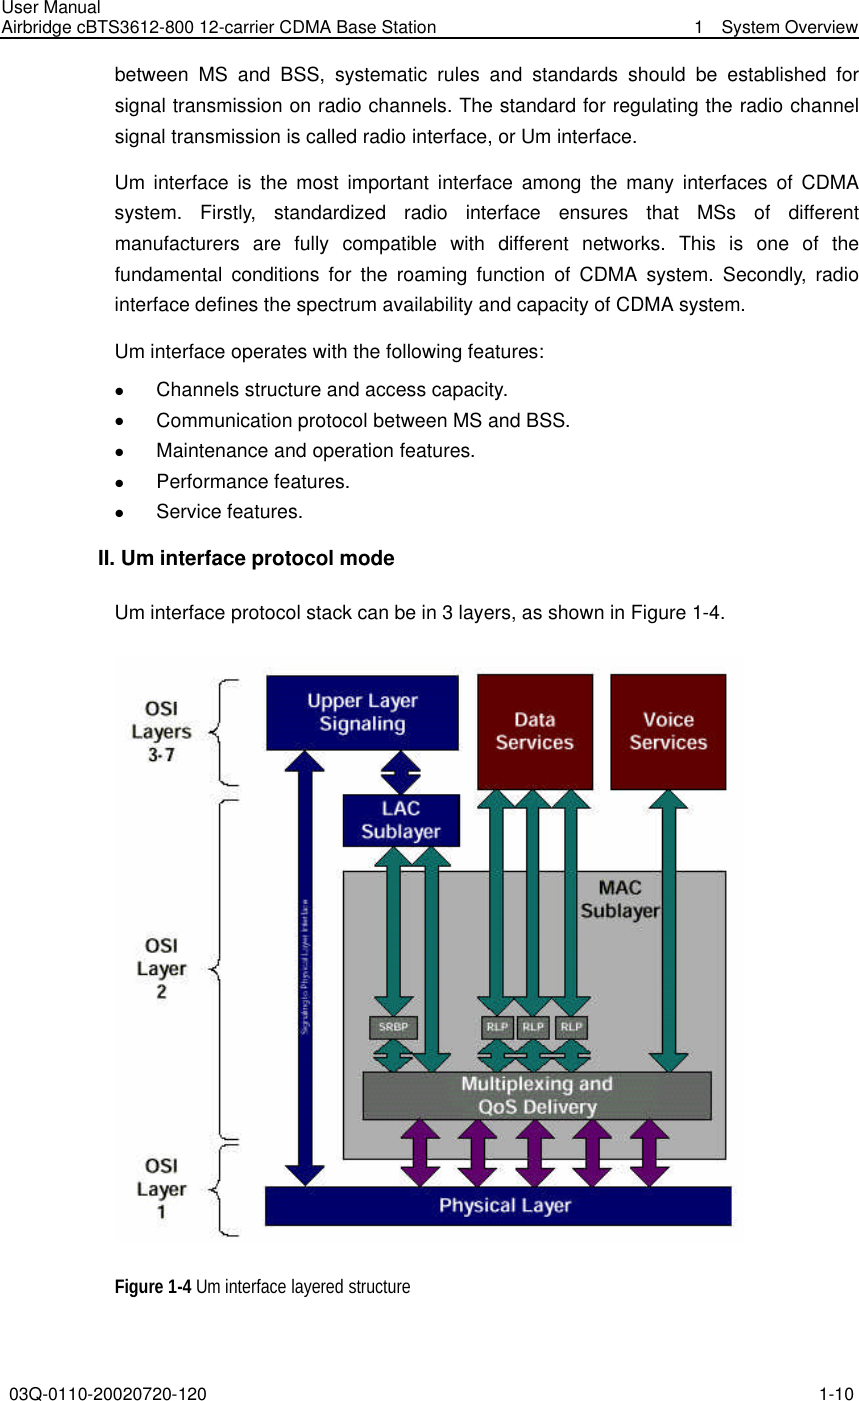 User Manual Airbridge cBTS3612-800 12-carrier CDMA Base Station   1  System Overview 03Q-0110-20020720-120 1-10  between MS and BSS, systematic rules and standards should be established for signal transmission on radio channels. The standard for regulating the radio channel signal transmission is called radio interface, or Um interface. Um  interface is the most important interface among the many interfaces of CDMA system. Firstly, standardized radio interface ensures that MSs of different manufacturers are fully compatible with different networks. This is one of the fundamental conditions for the roaming function of CDMA system. Secondly,  radio interface defines the spectrum availability and capacity of CDMA system. Um interface operates with the following features:   l Channels structure and access capacity.   l Communication protocol between MS and BSS.   l Maintenance and operation features.   l Performance features.   l Service features. II. Um interface protocol mode Um interface protocol stack can be in 3 layers, as shown in Figure 1-4.  Figure 1-4 Um interface layered structure 